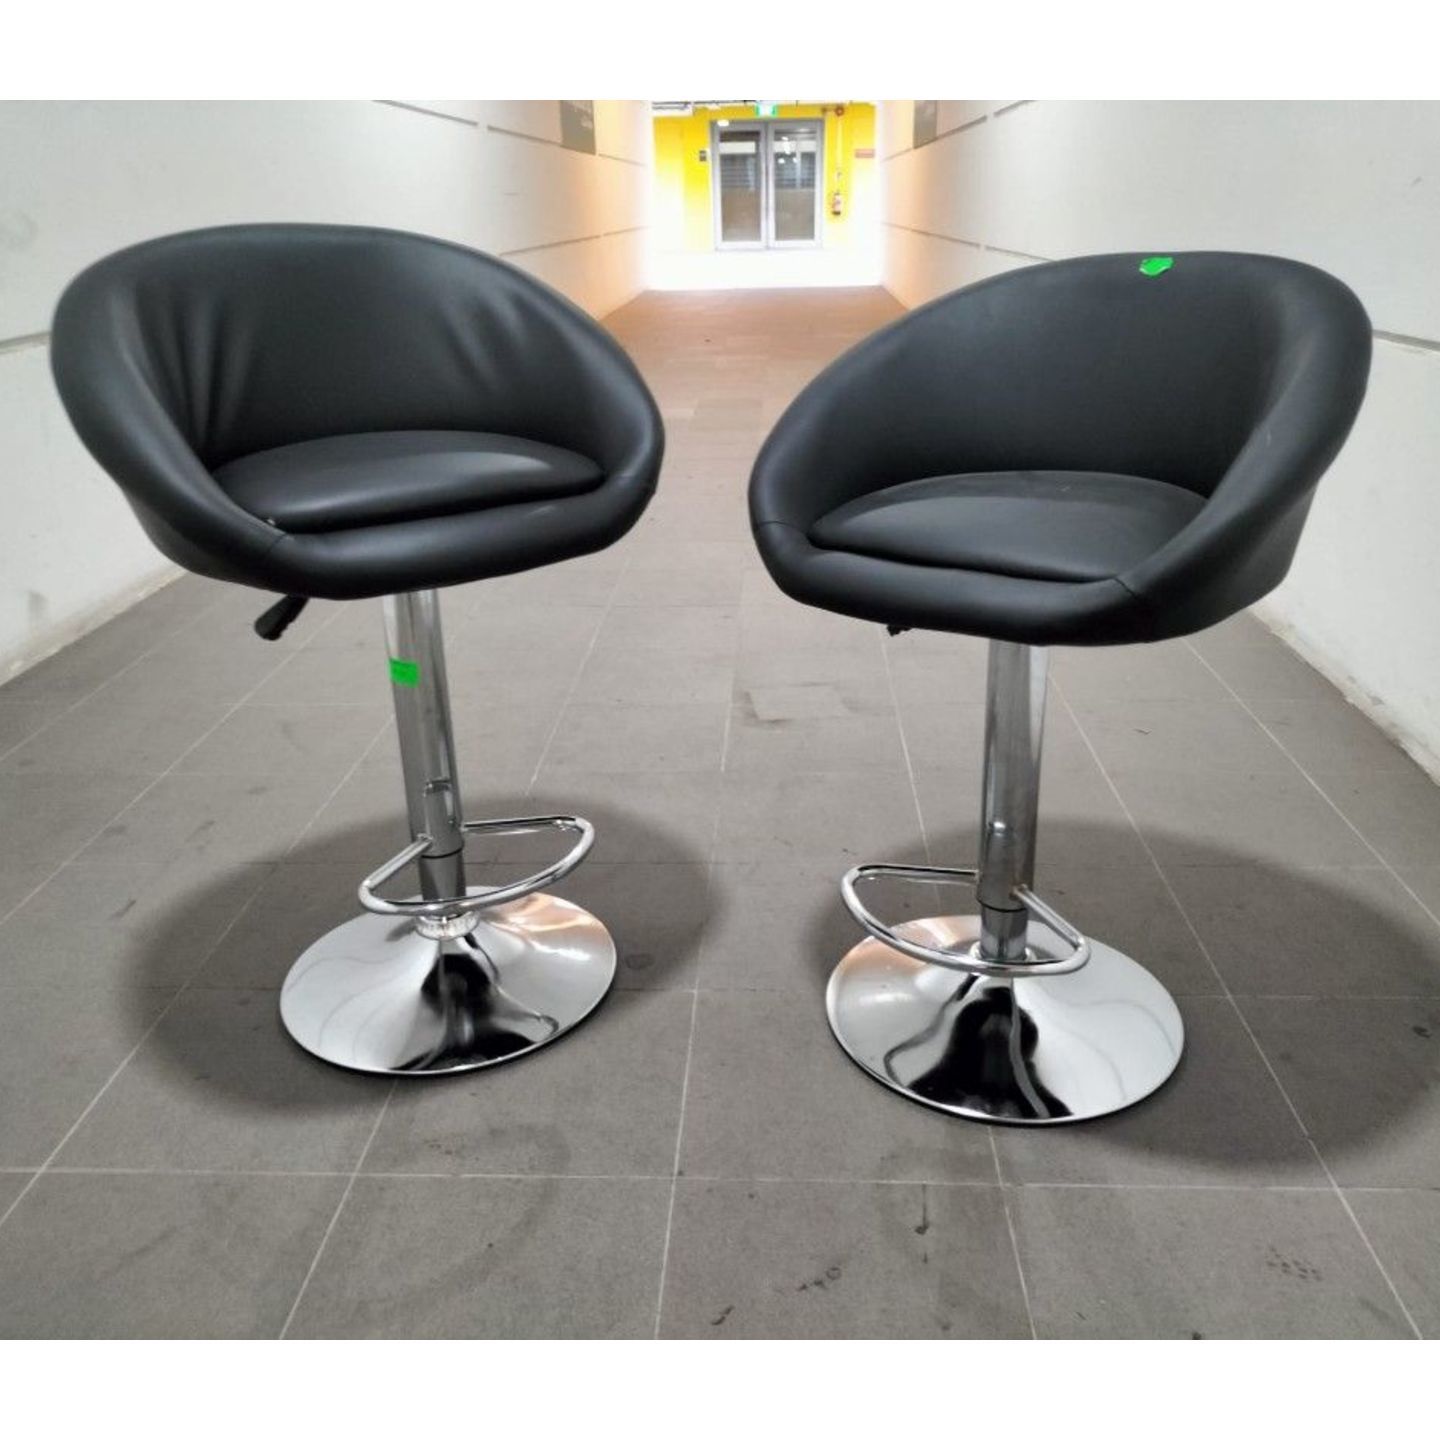 2pc IONIC Bar Stools in BLACK